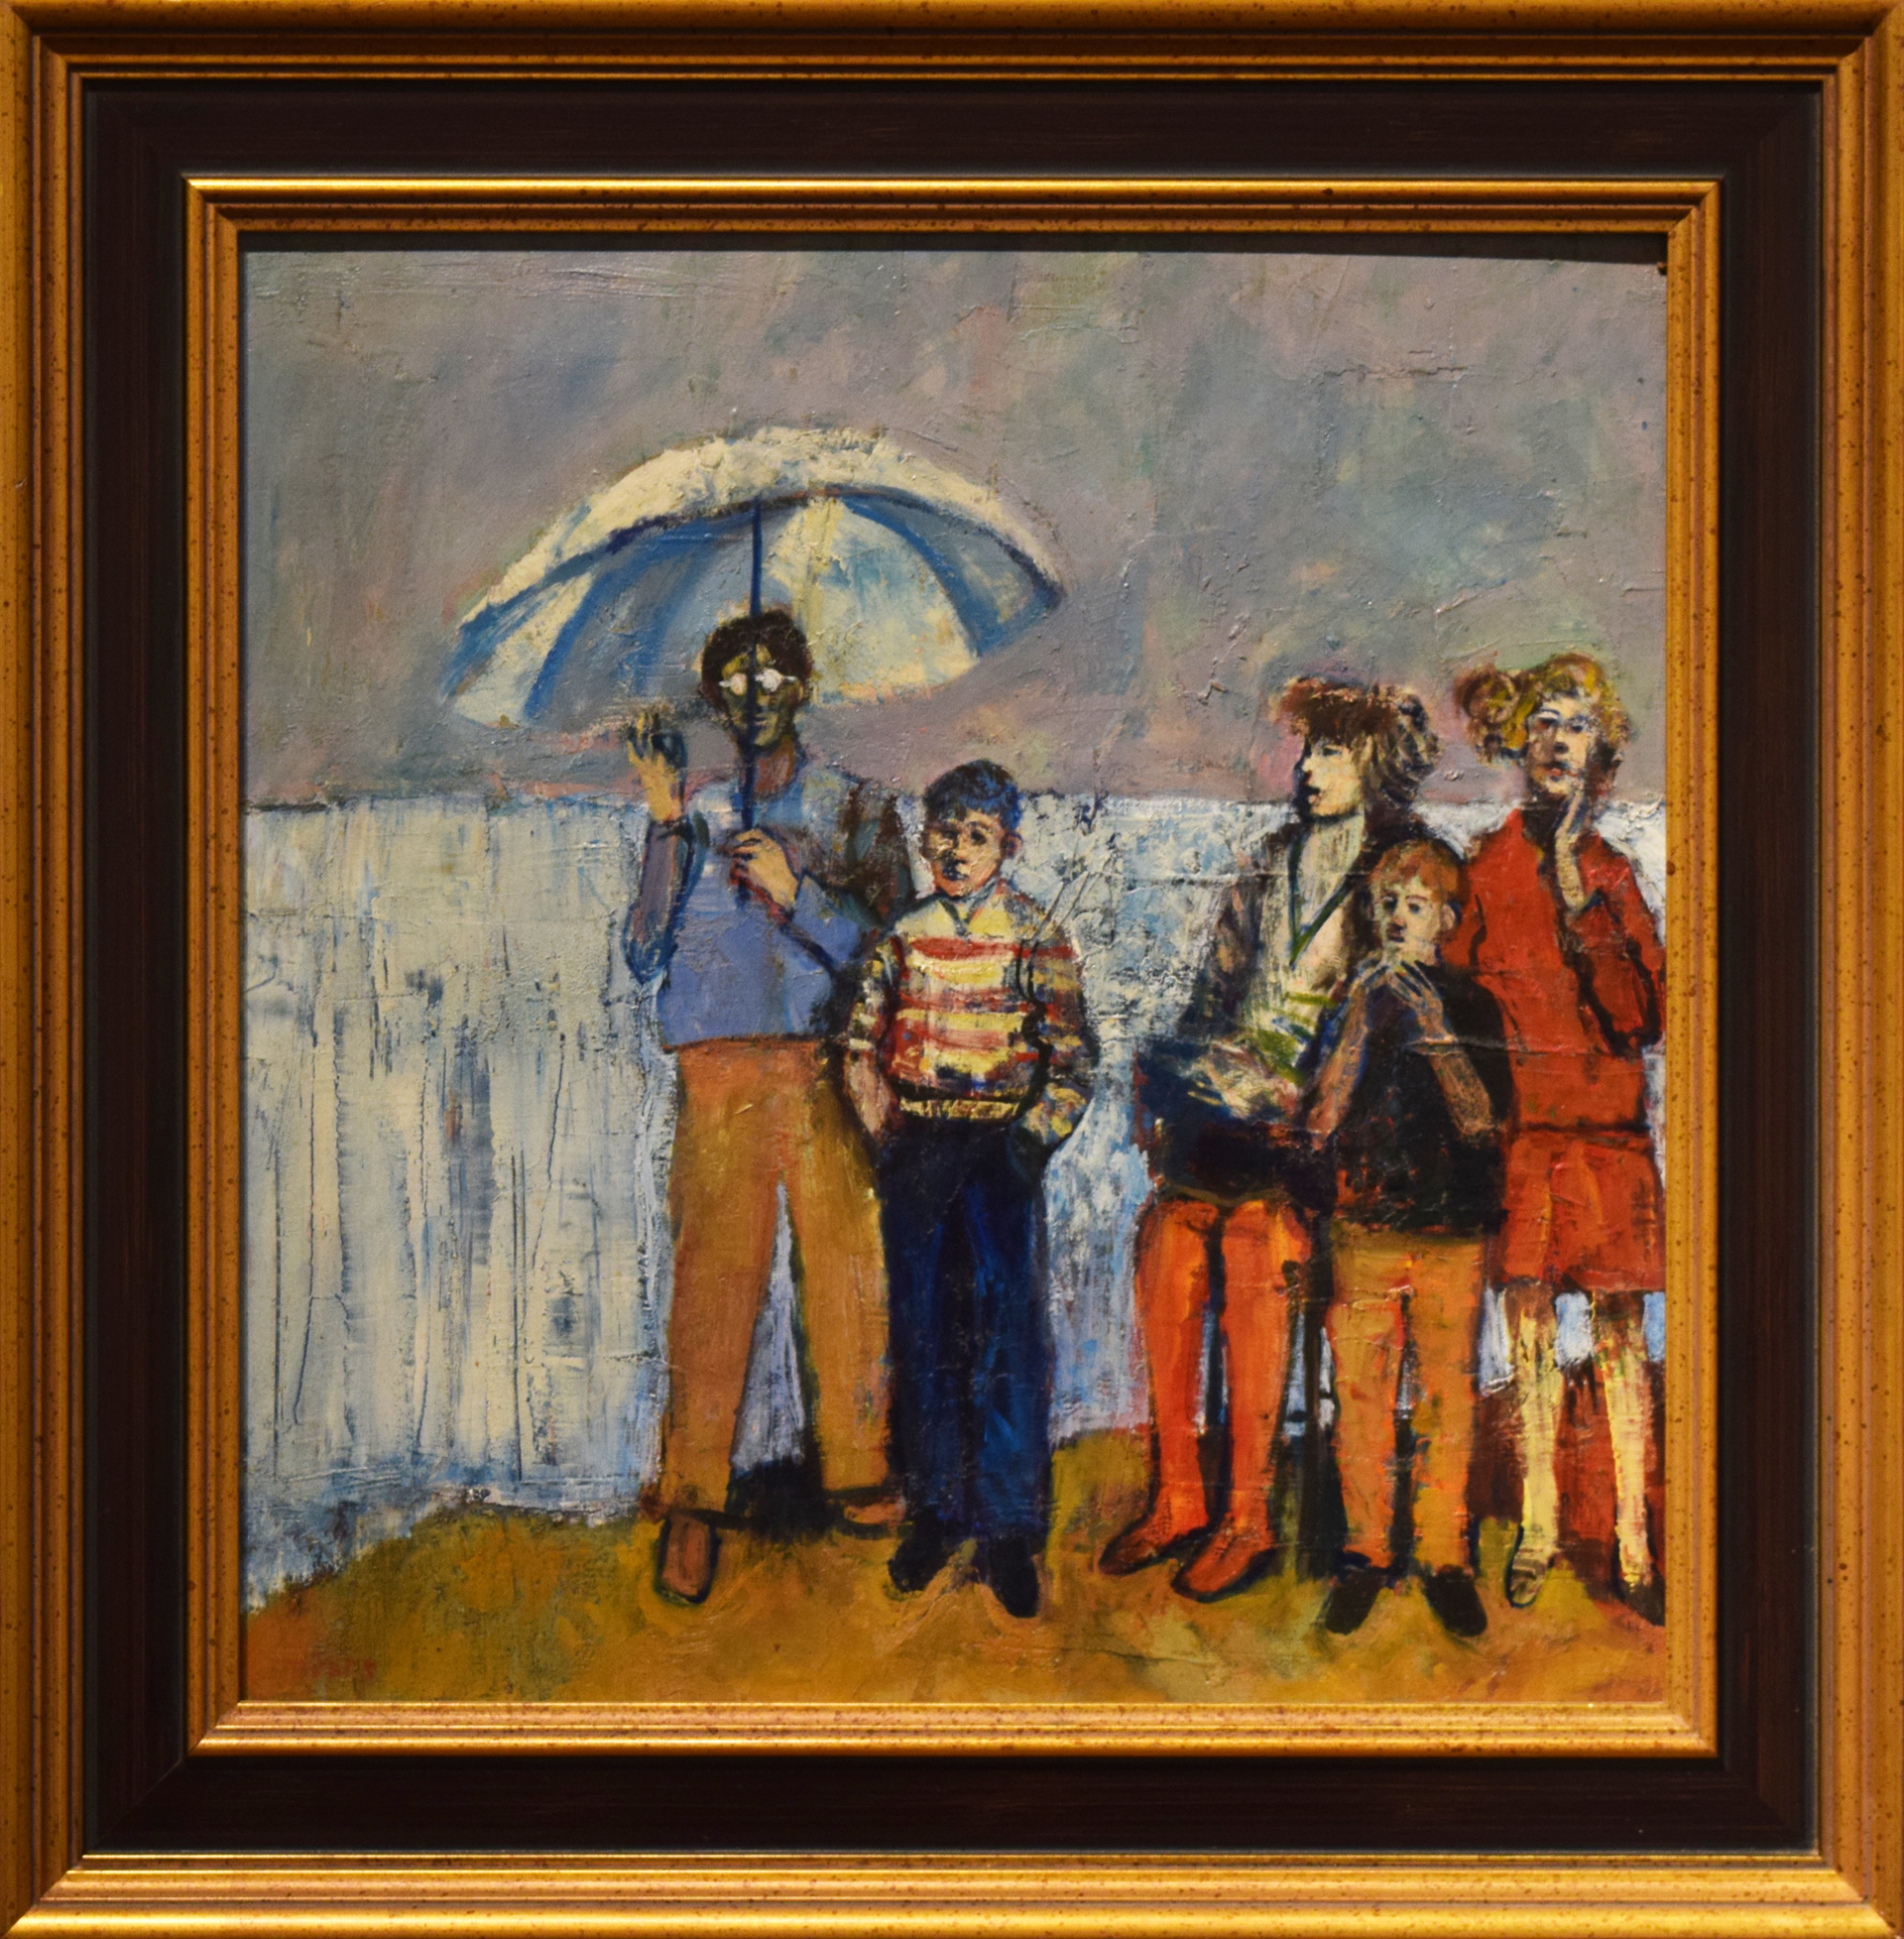 Figures with Umbrella by Herb Mears